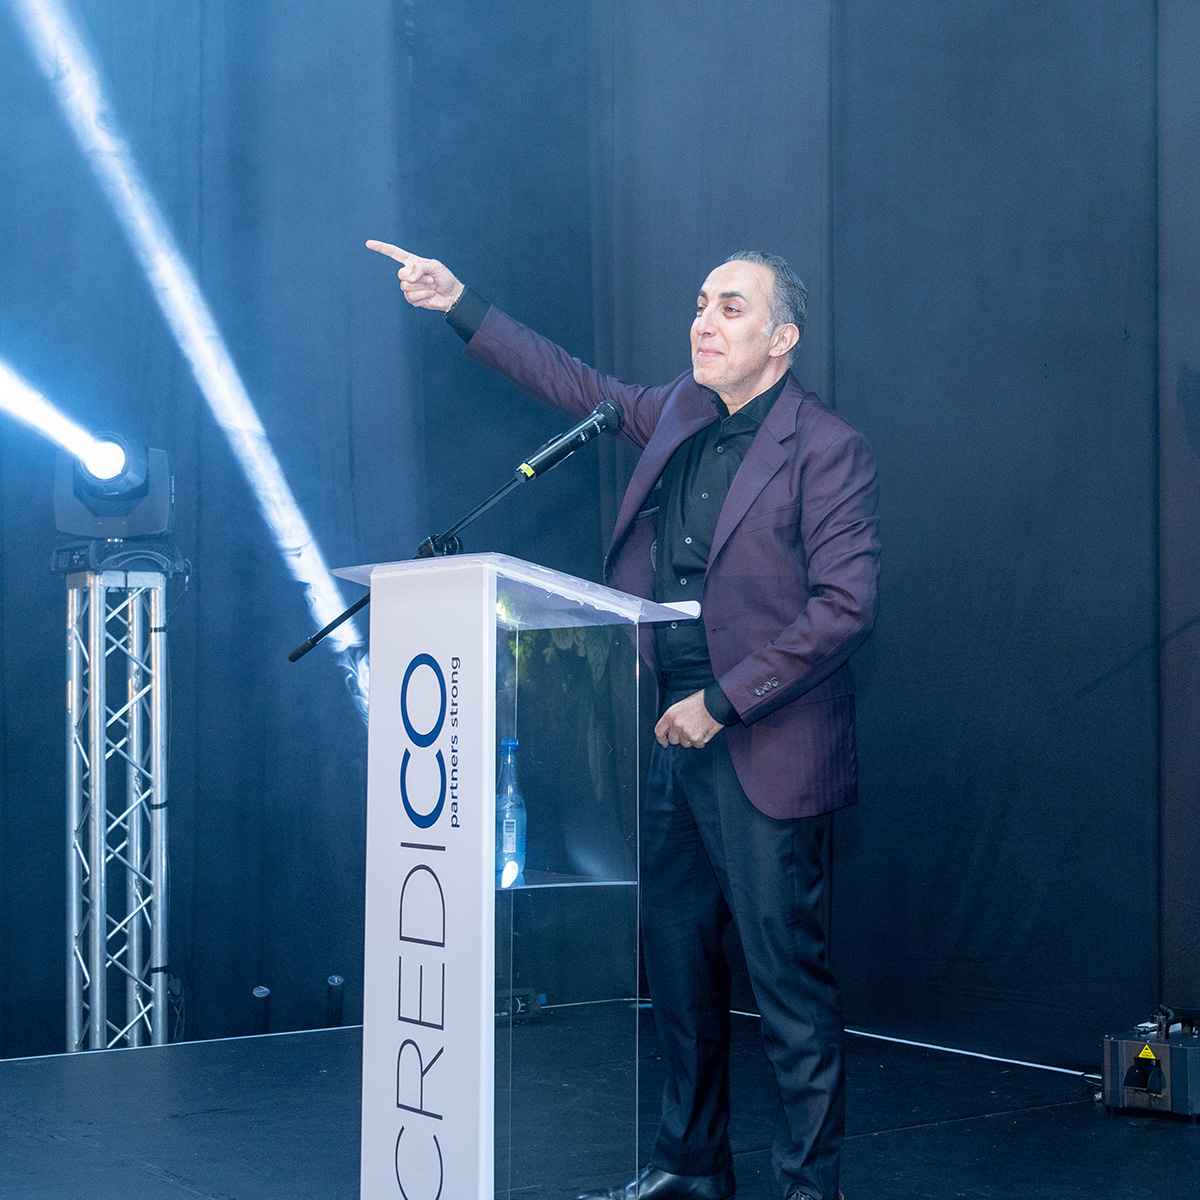 Credico's Chairman and founder, Antoine Nohra, addresses the audience from a podium on stage at Credico South Africa's 2023 Awards Gala at Sun City Resort.